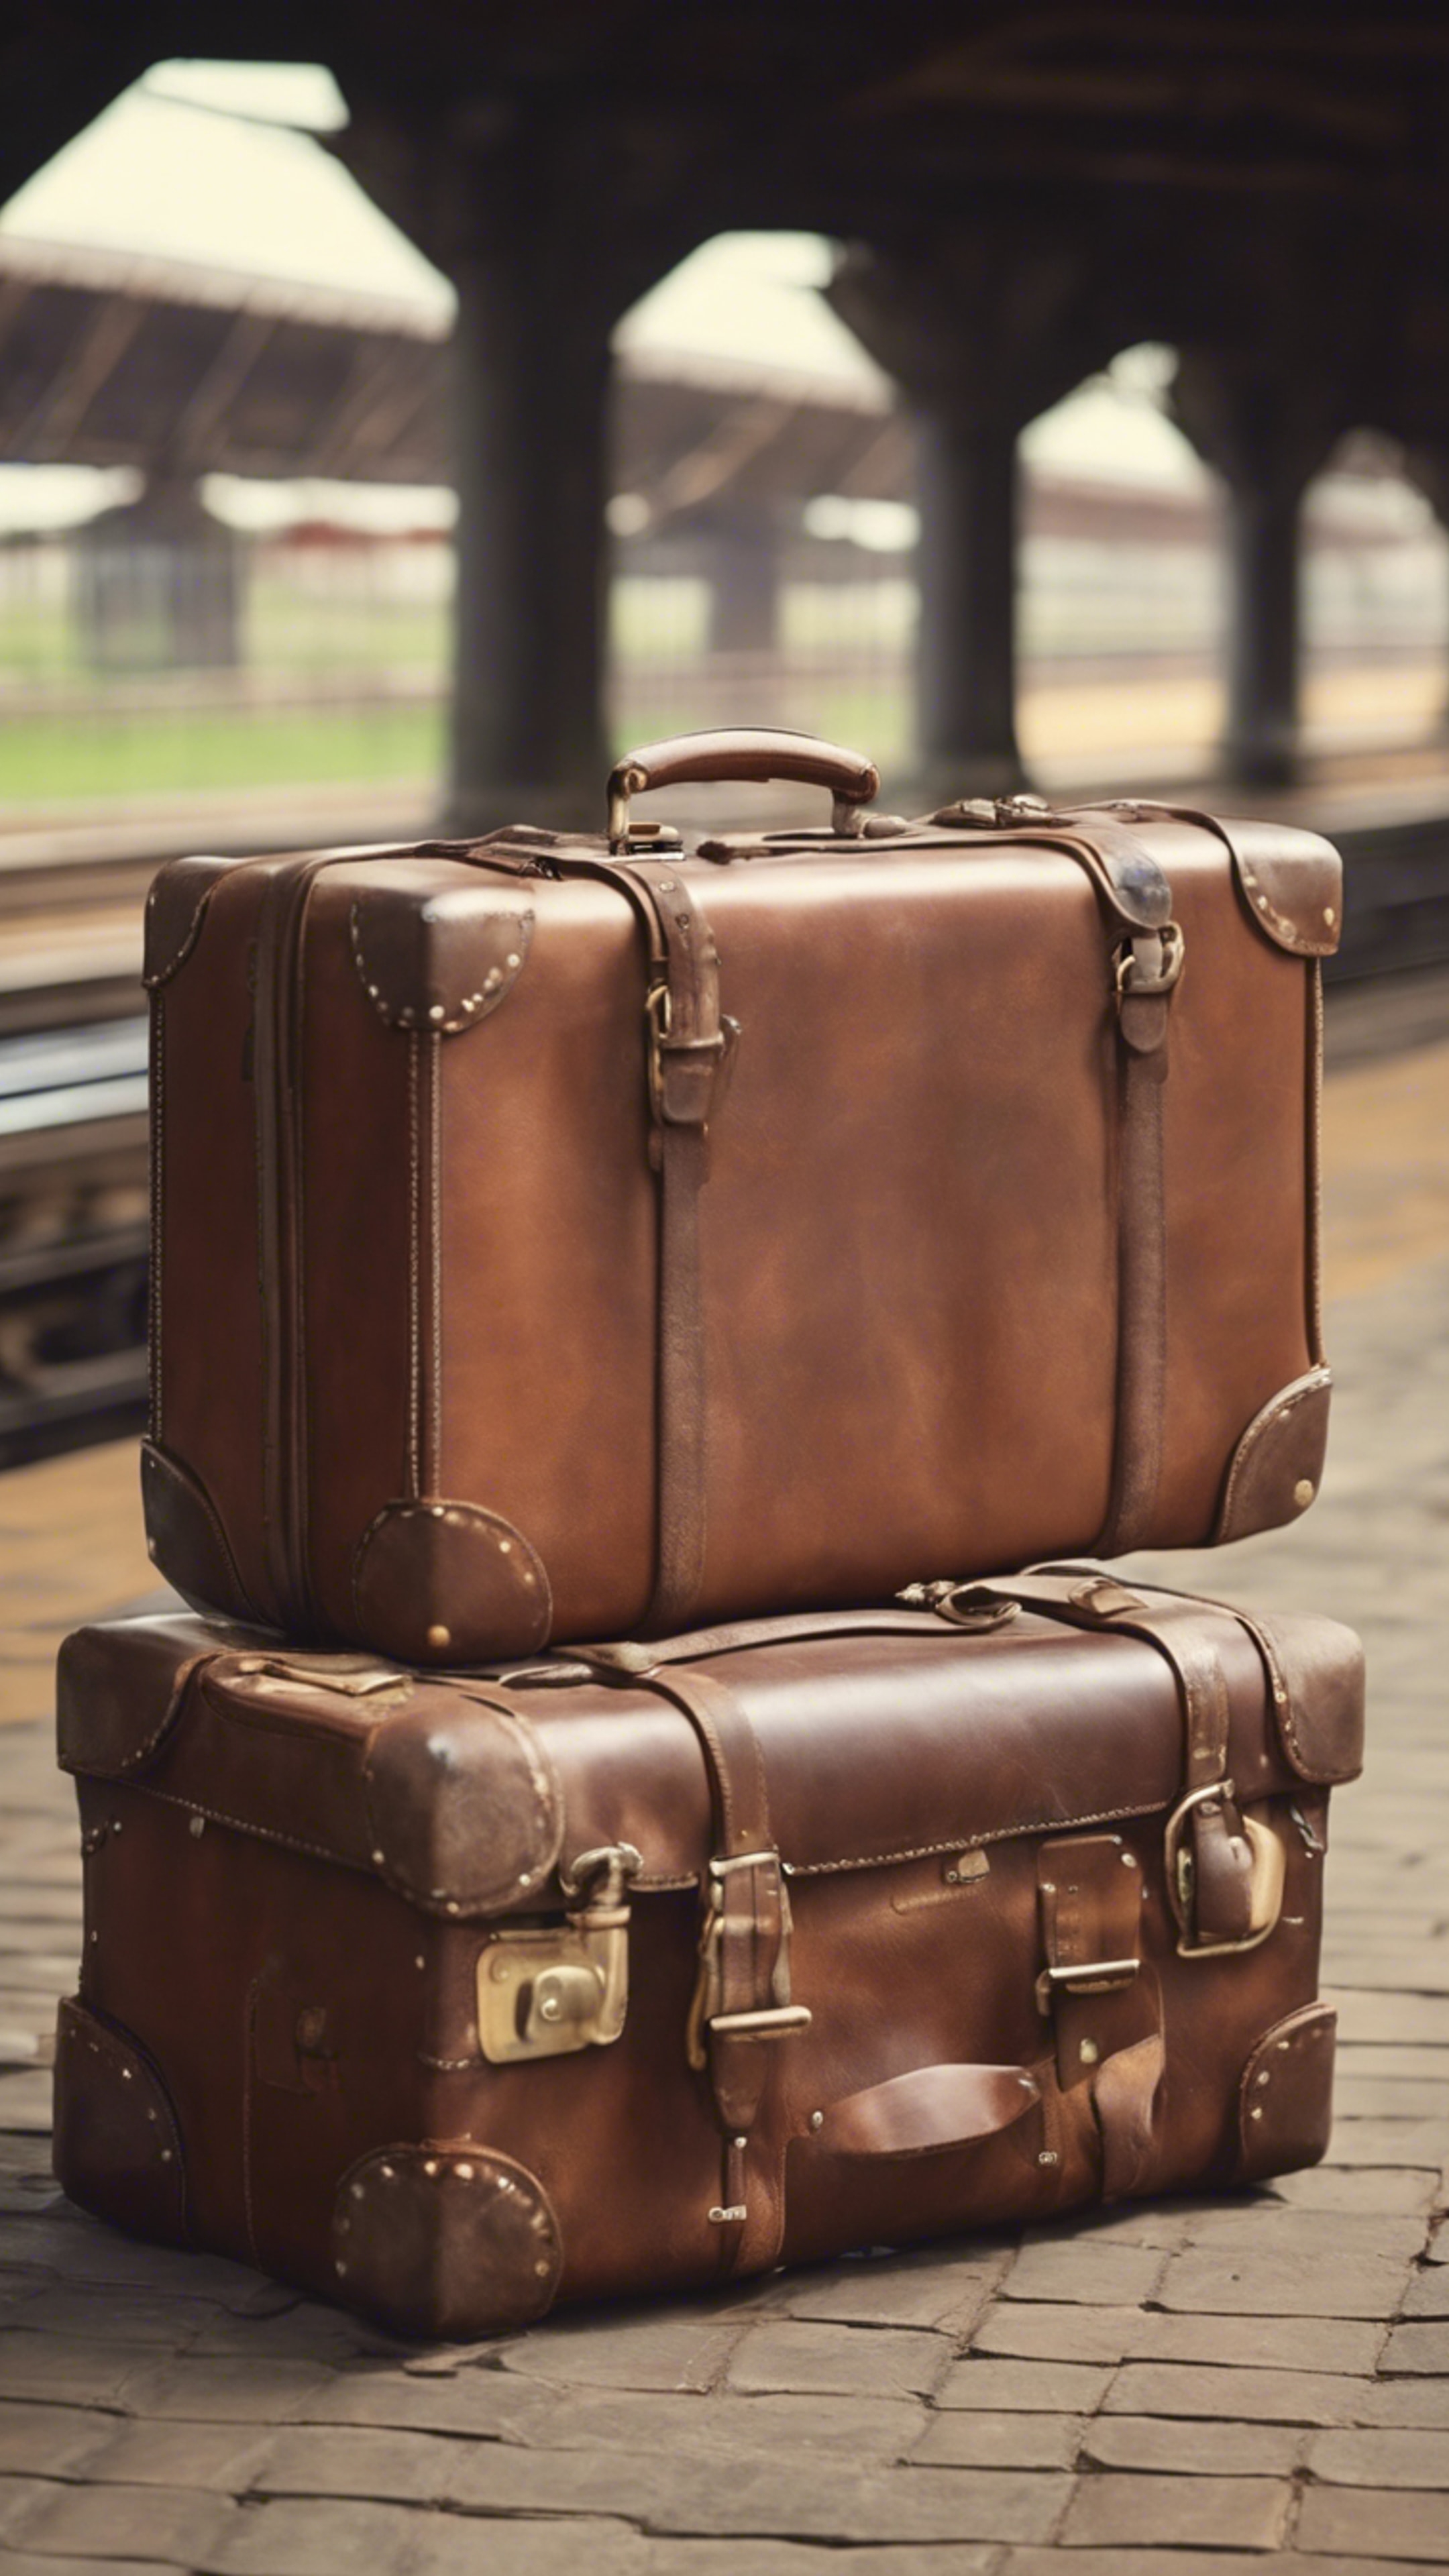 A rustic brown leather suitcase with travel tags, sitting at a quaint railway station. Wallpaper[6b7e956de06740cdbd0e]